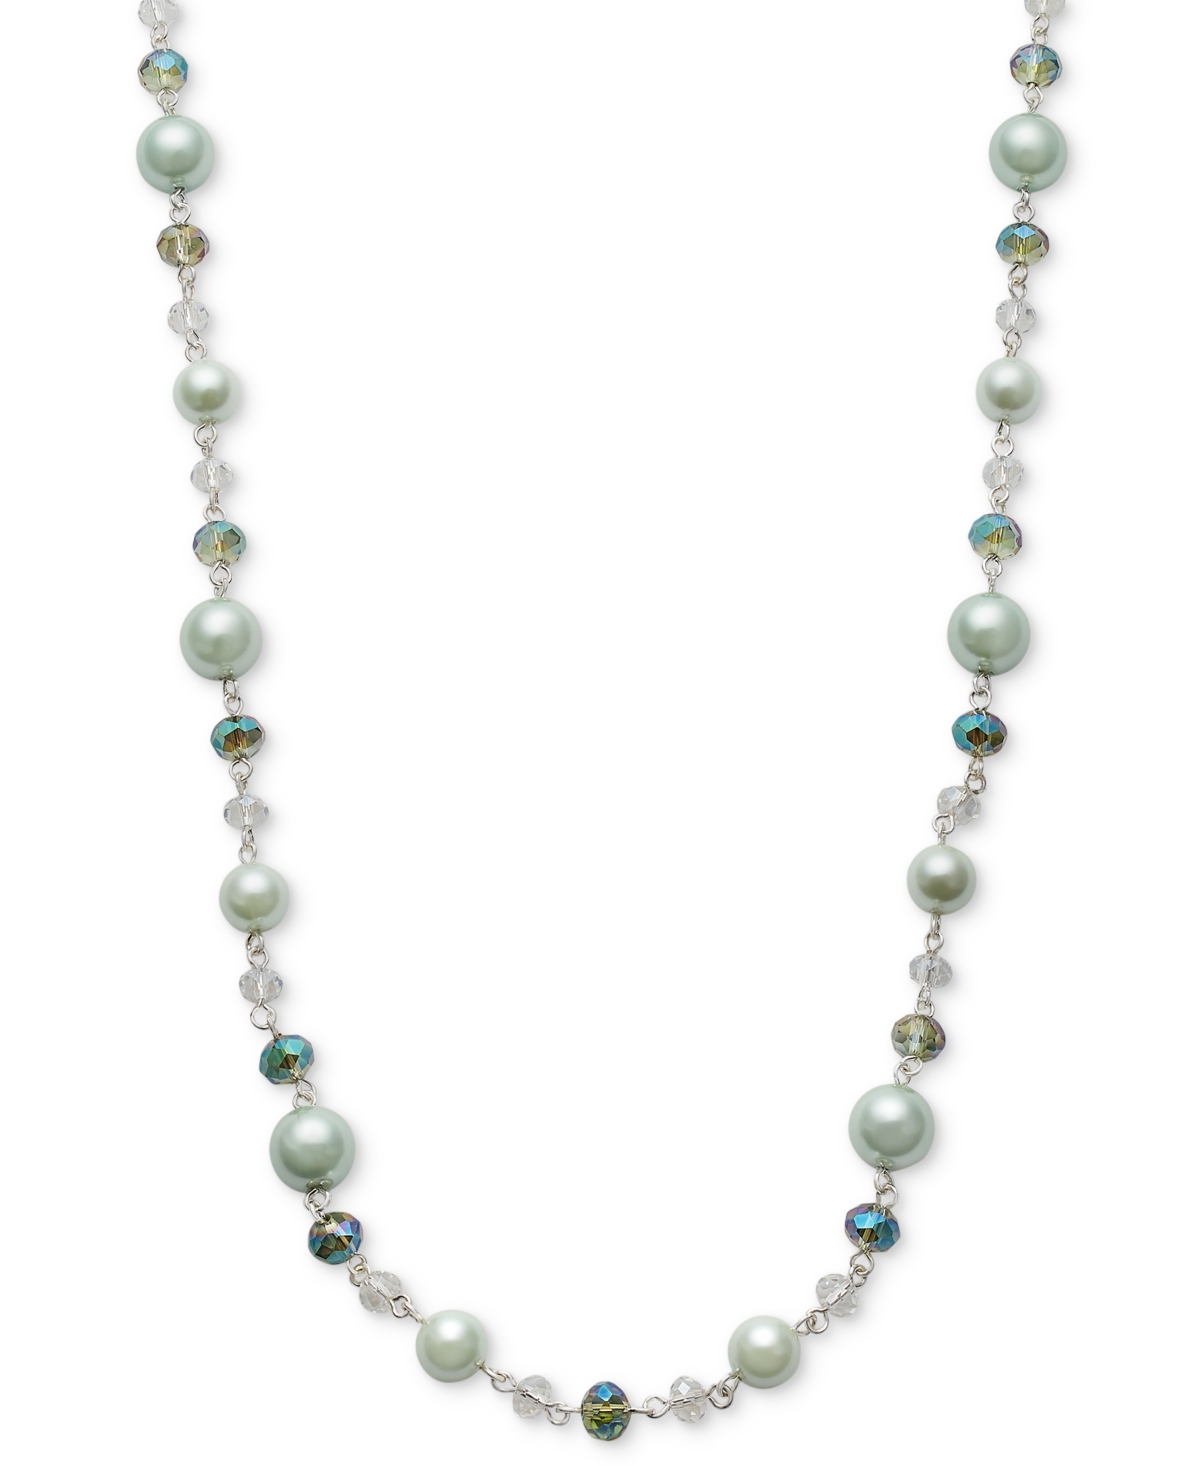 Silver-Tone Color Bead & Imitation Pearl Strand Necklace, 40" + 2" extender, Created for Macy's - Green